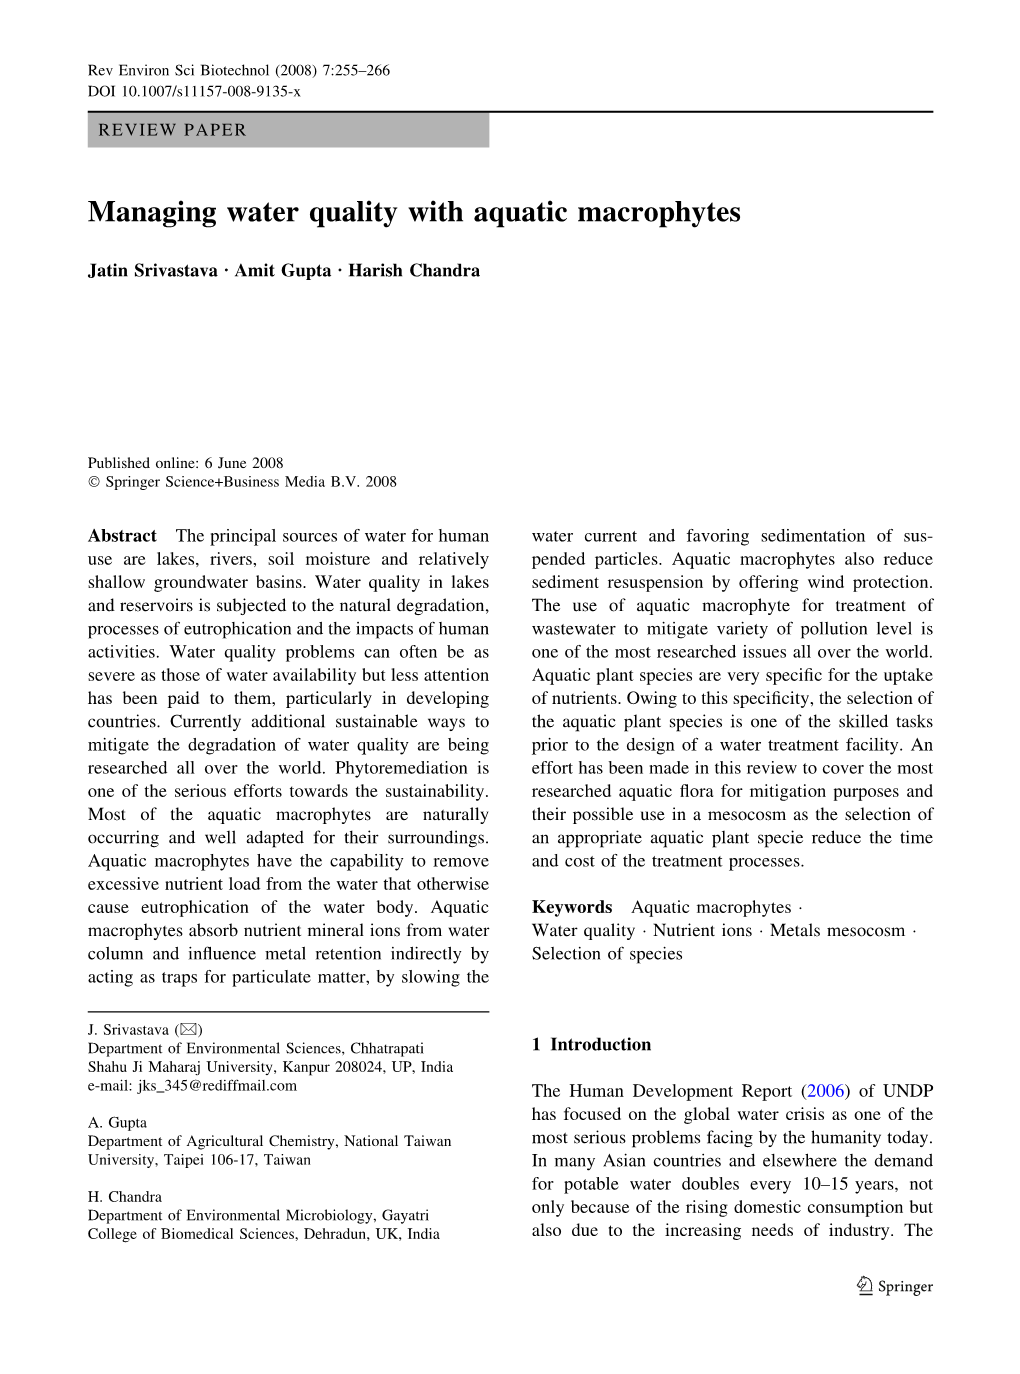 Managing Water Quality with Aquatic Macrophytes